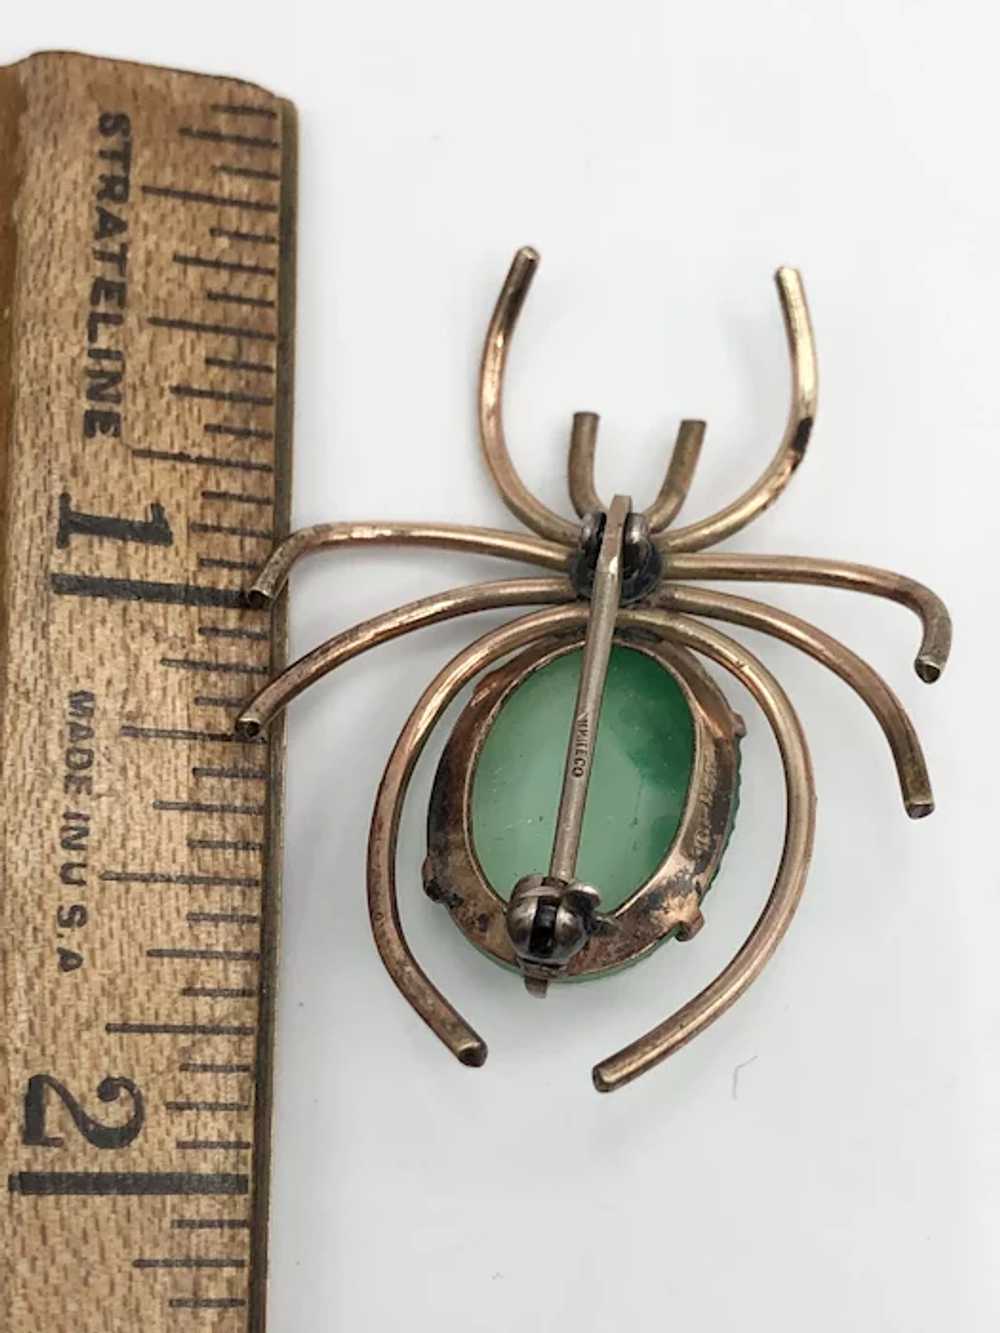 10k Gold Filled White Co Spider Brooch Pin - image 7